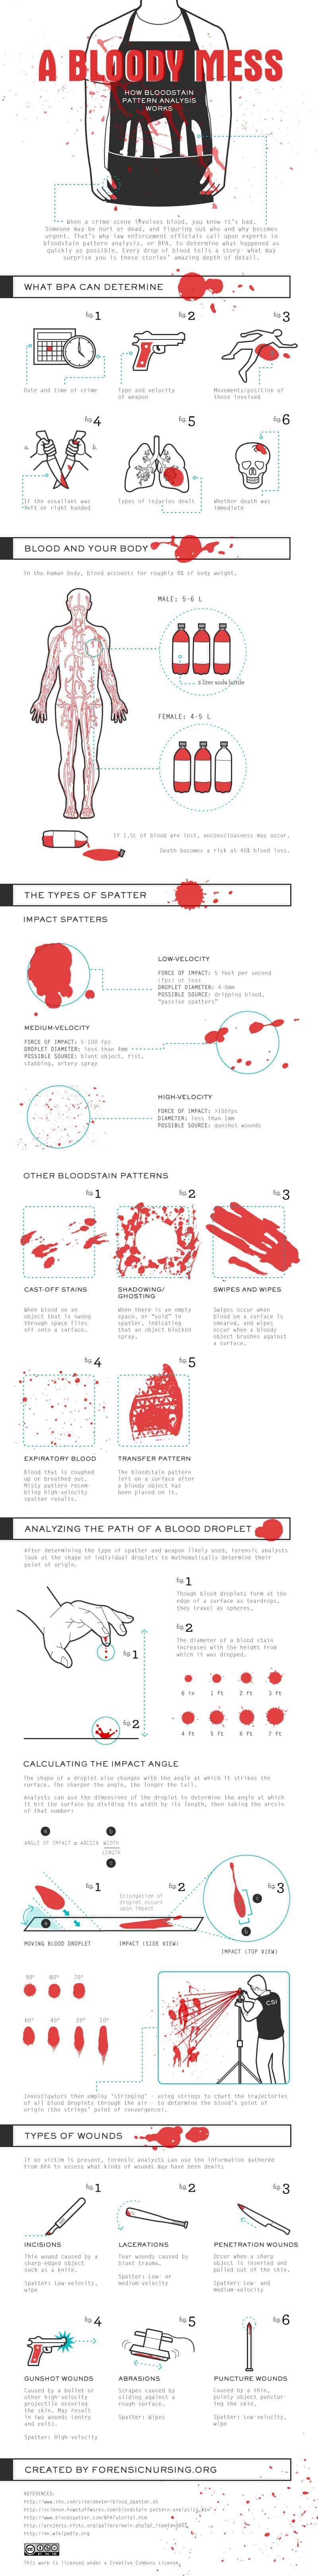 Infographic about bloodstain pattern analysis